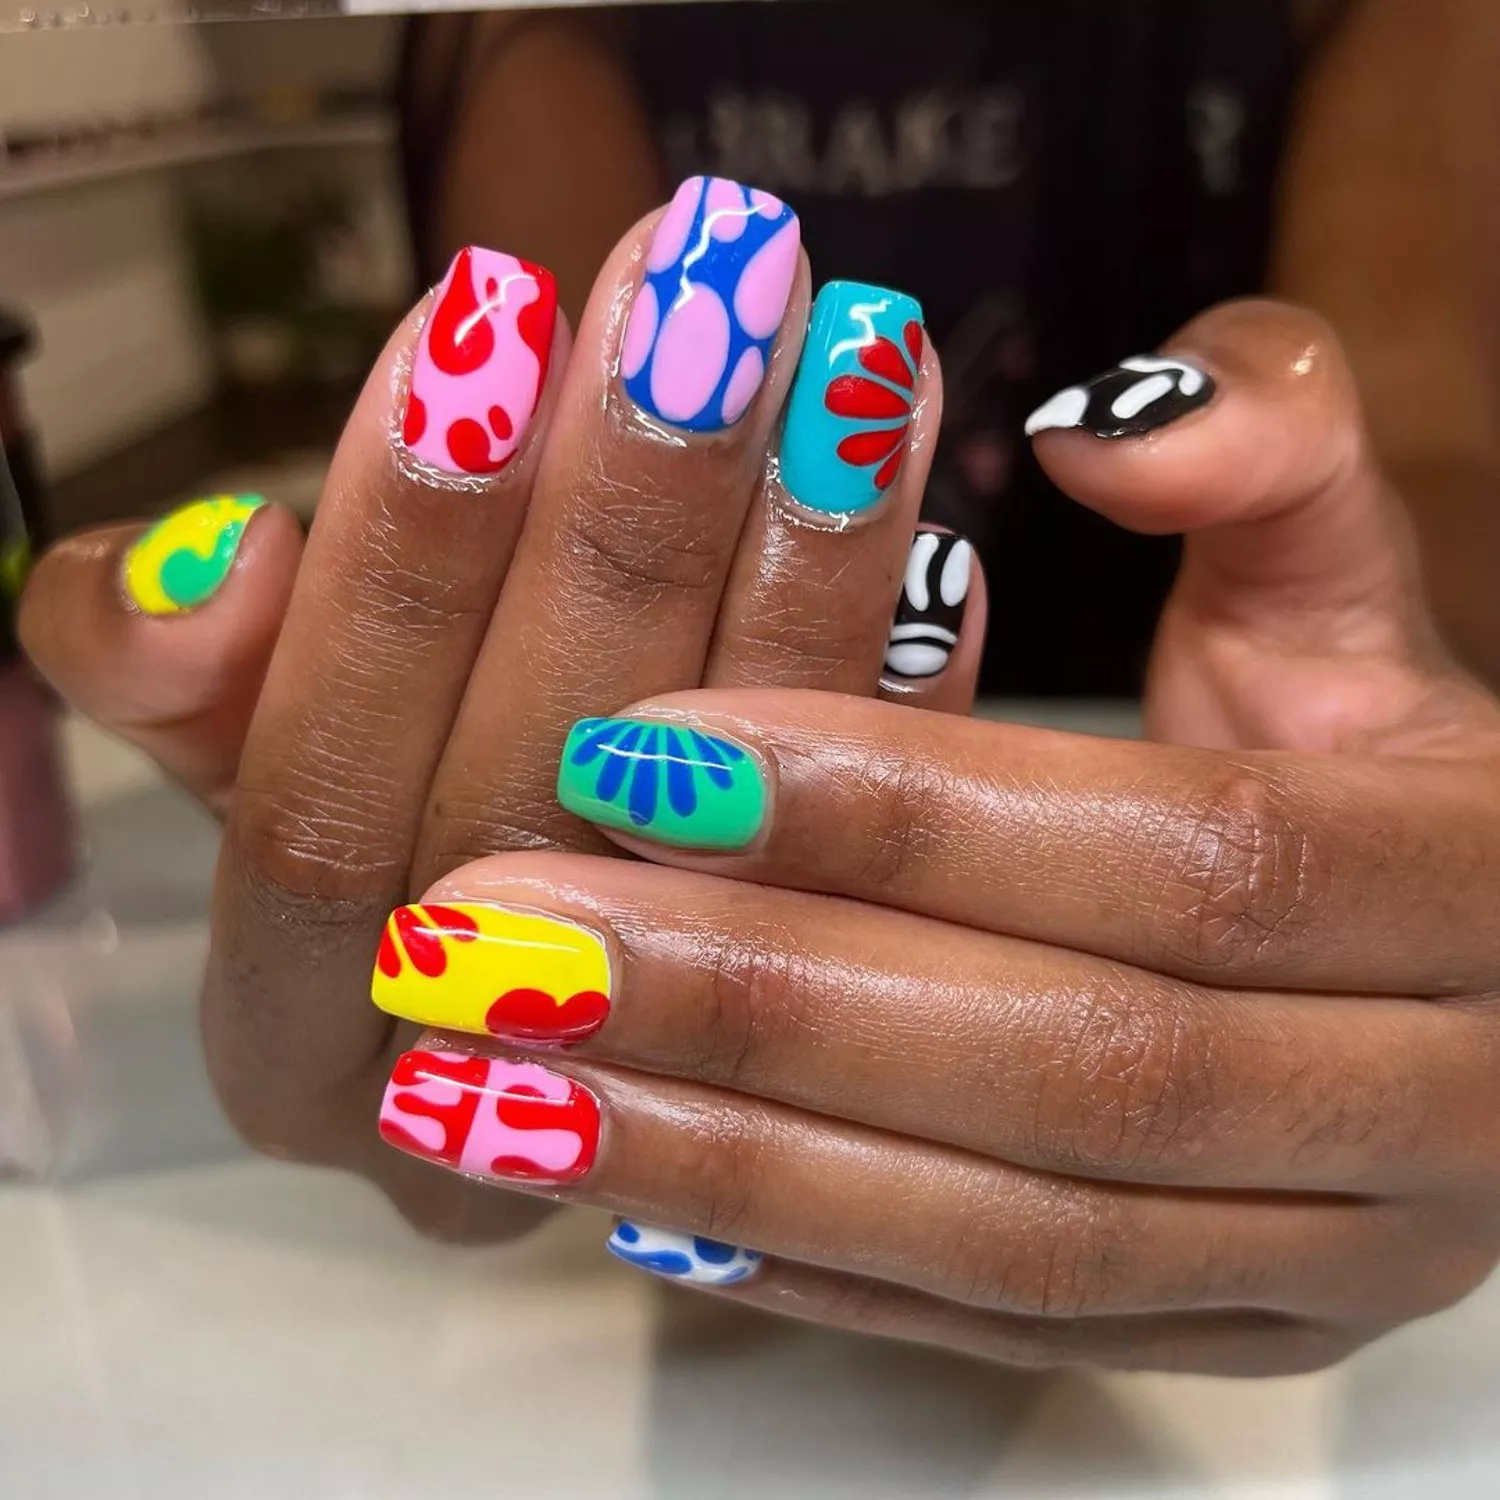 Manicure with mismatched multicolored flower and abstract designs